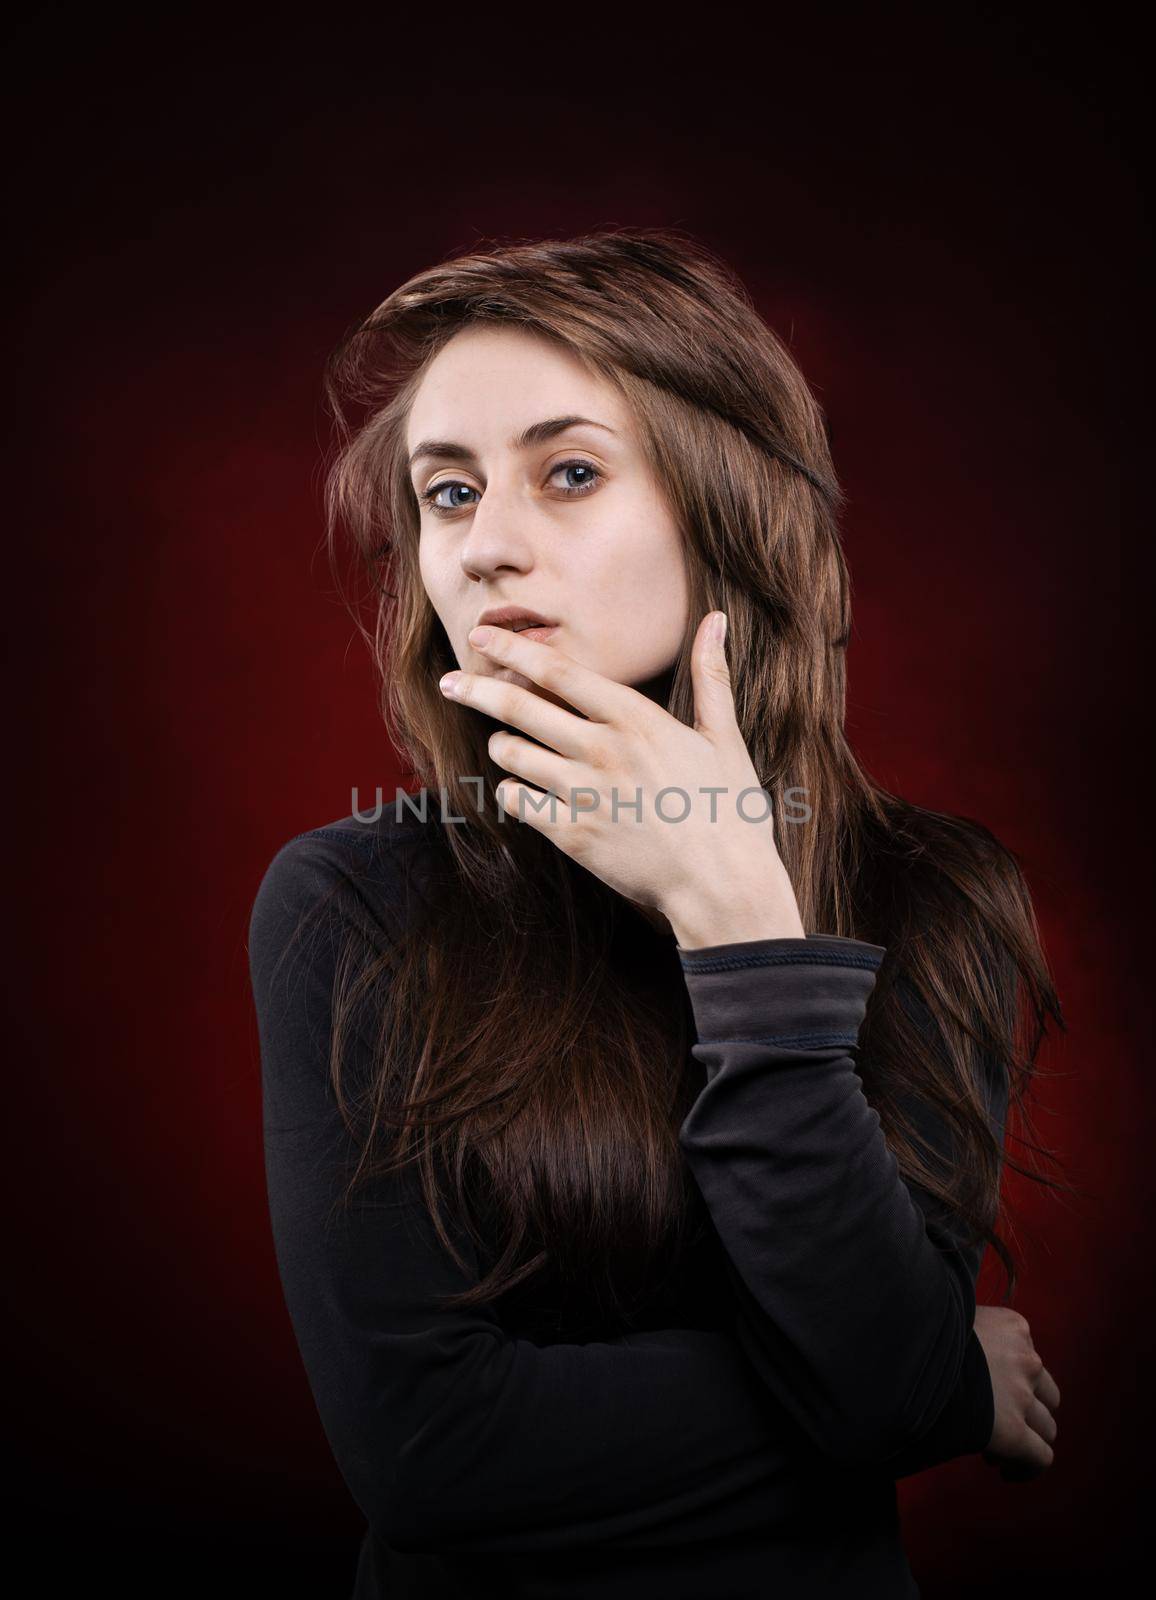 Teenage girl portrait with hands near the face. Fashion, portrait and people concept. Portrait of a young emotional woman on a dark background